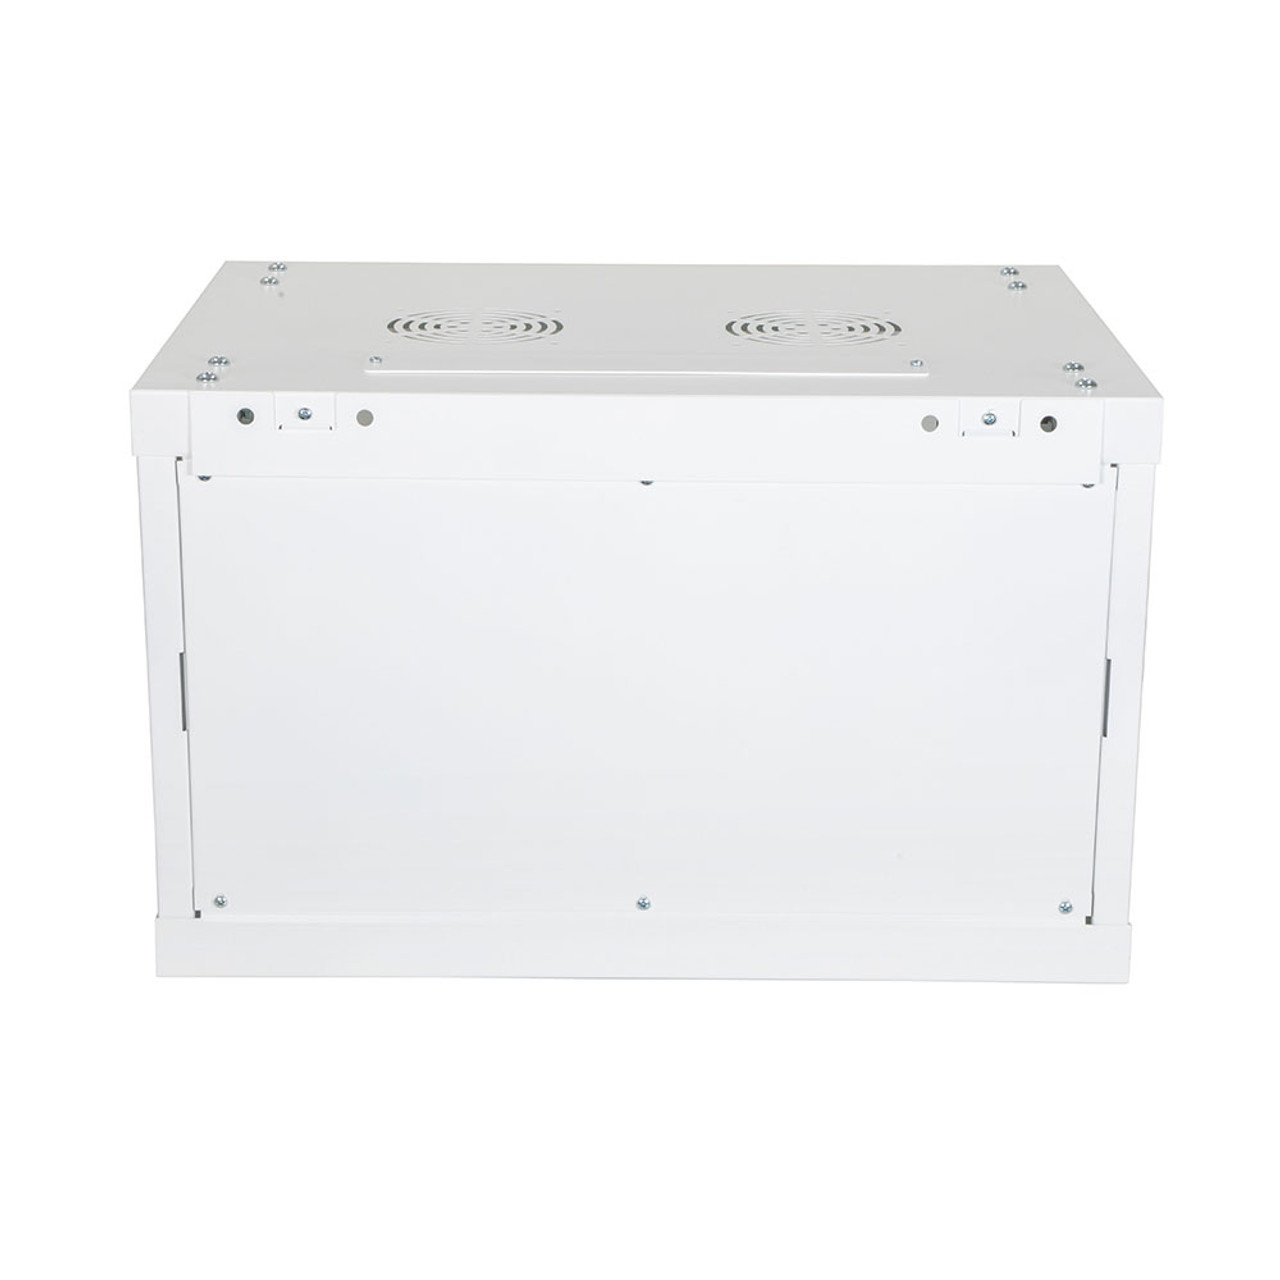 NavePoint 19-inch Wide Networking Cabinet, 6U, 17 Inches Deep, White